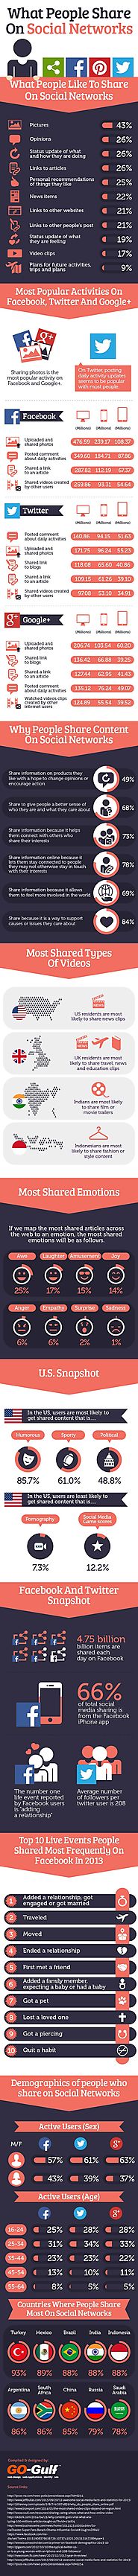 What & Why People Share On Social Media (Infographic)